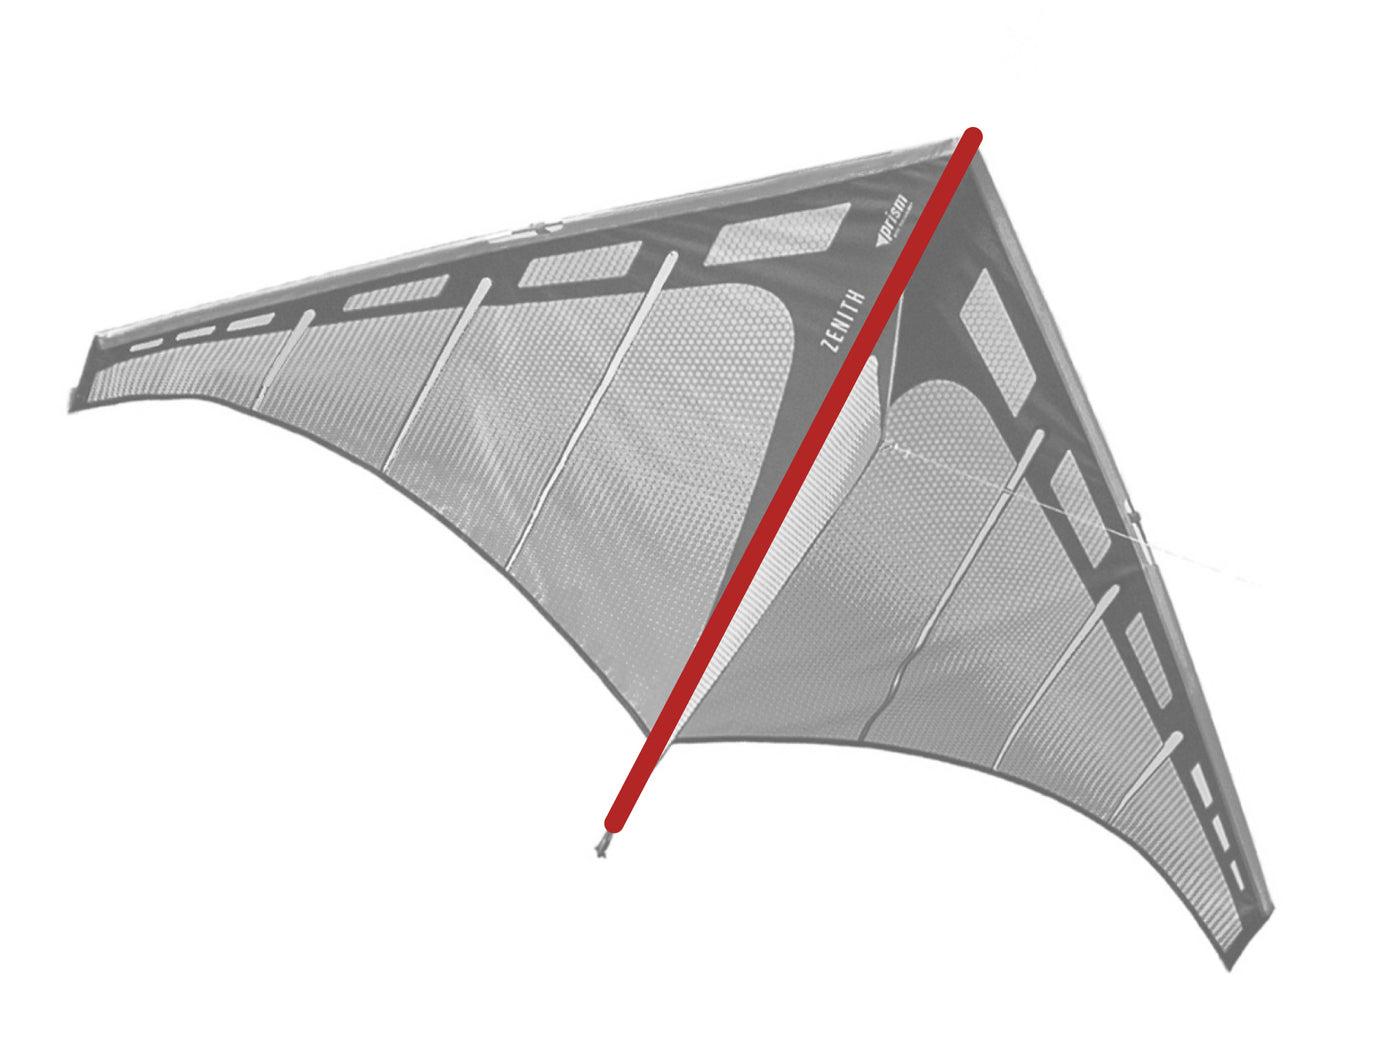 Diagram showing location of the Zenith 5  Spine on the kite.